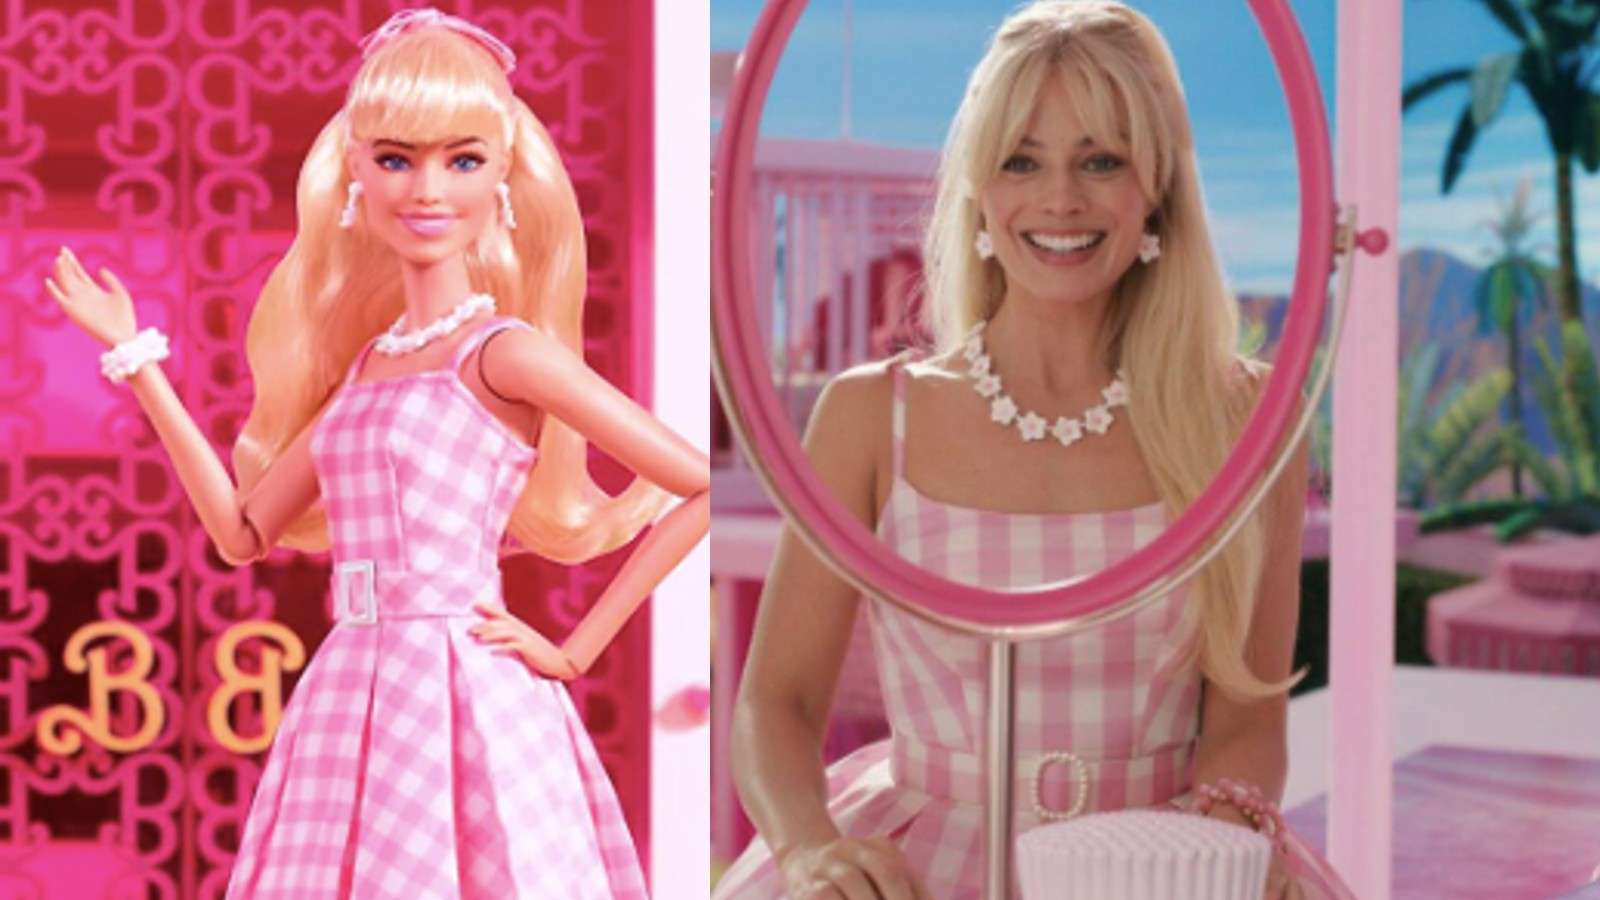 Barbie cast: All actors and characters - Dexerto